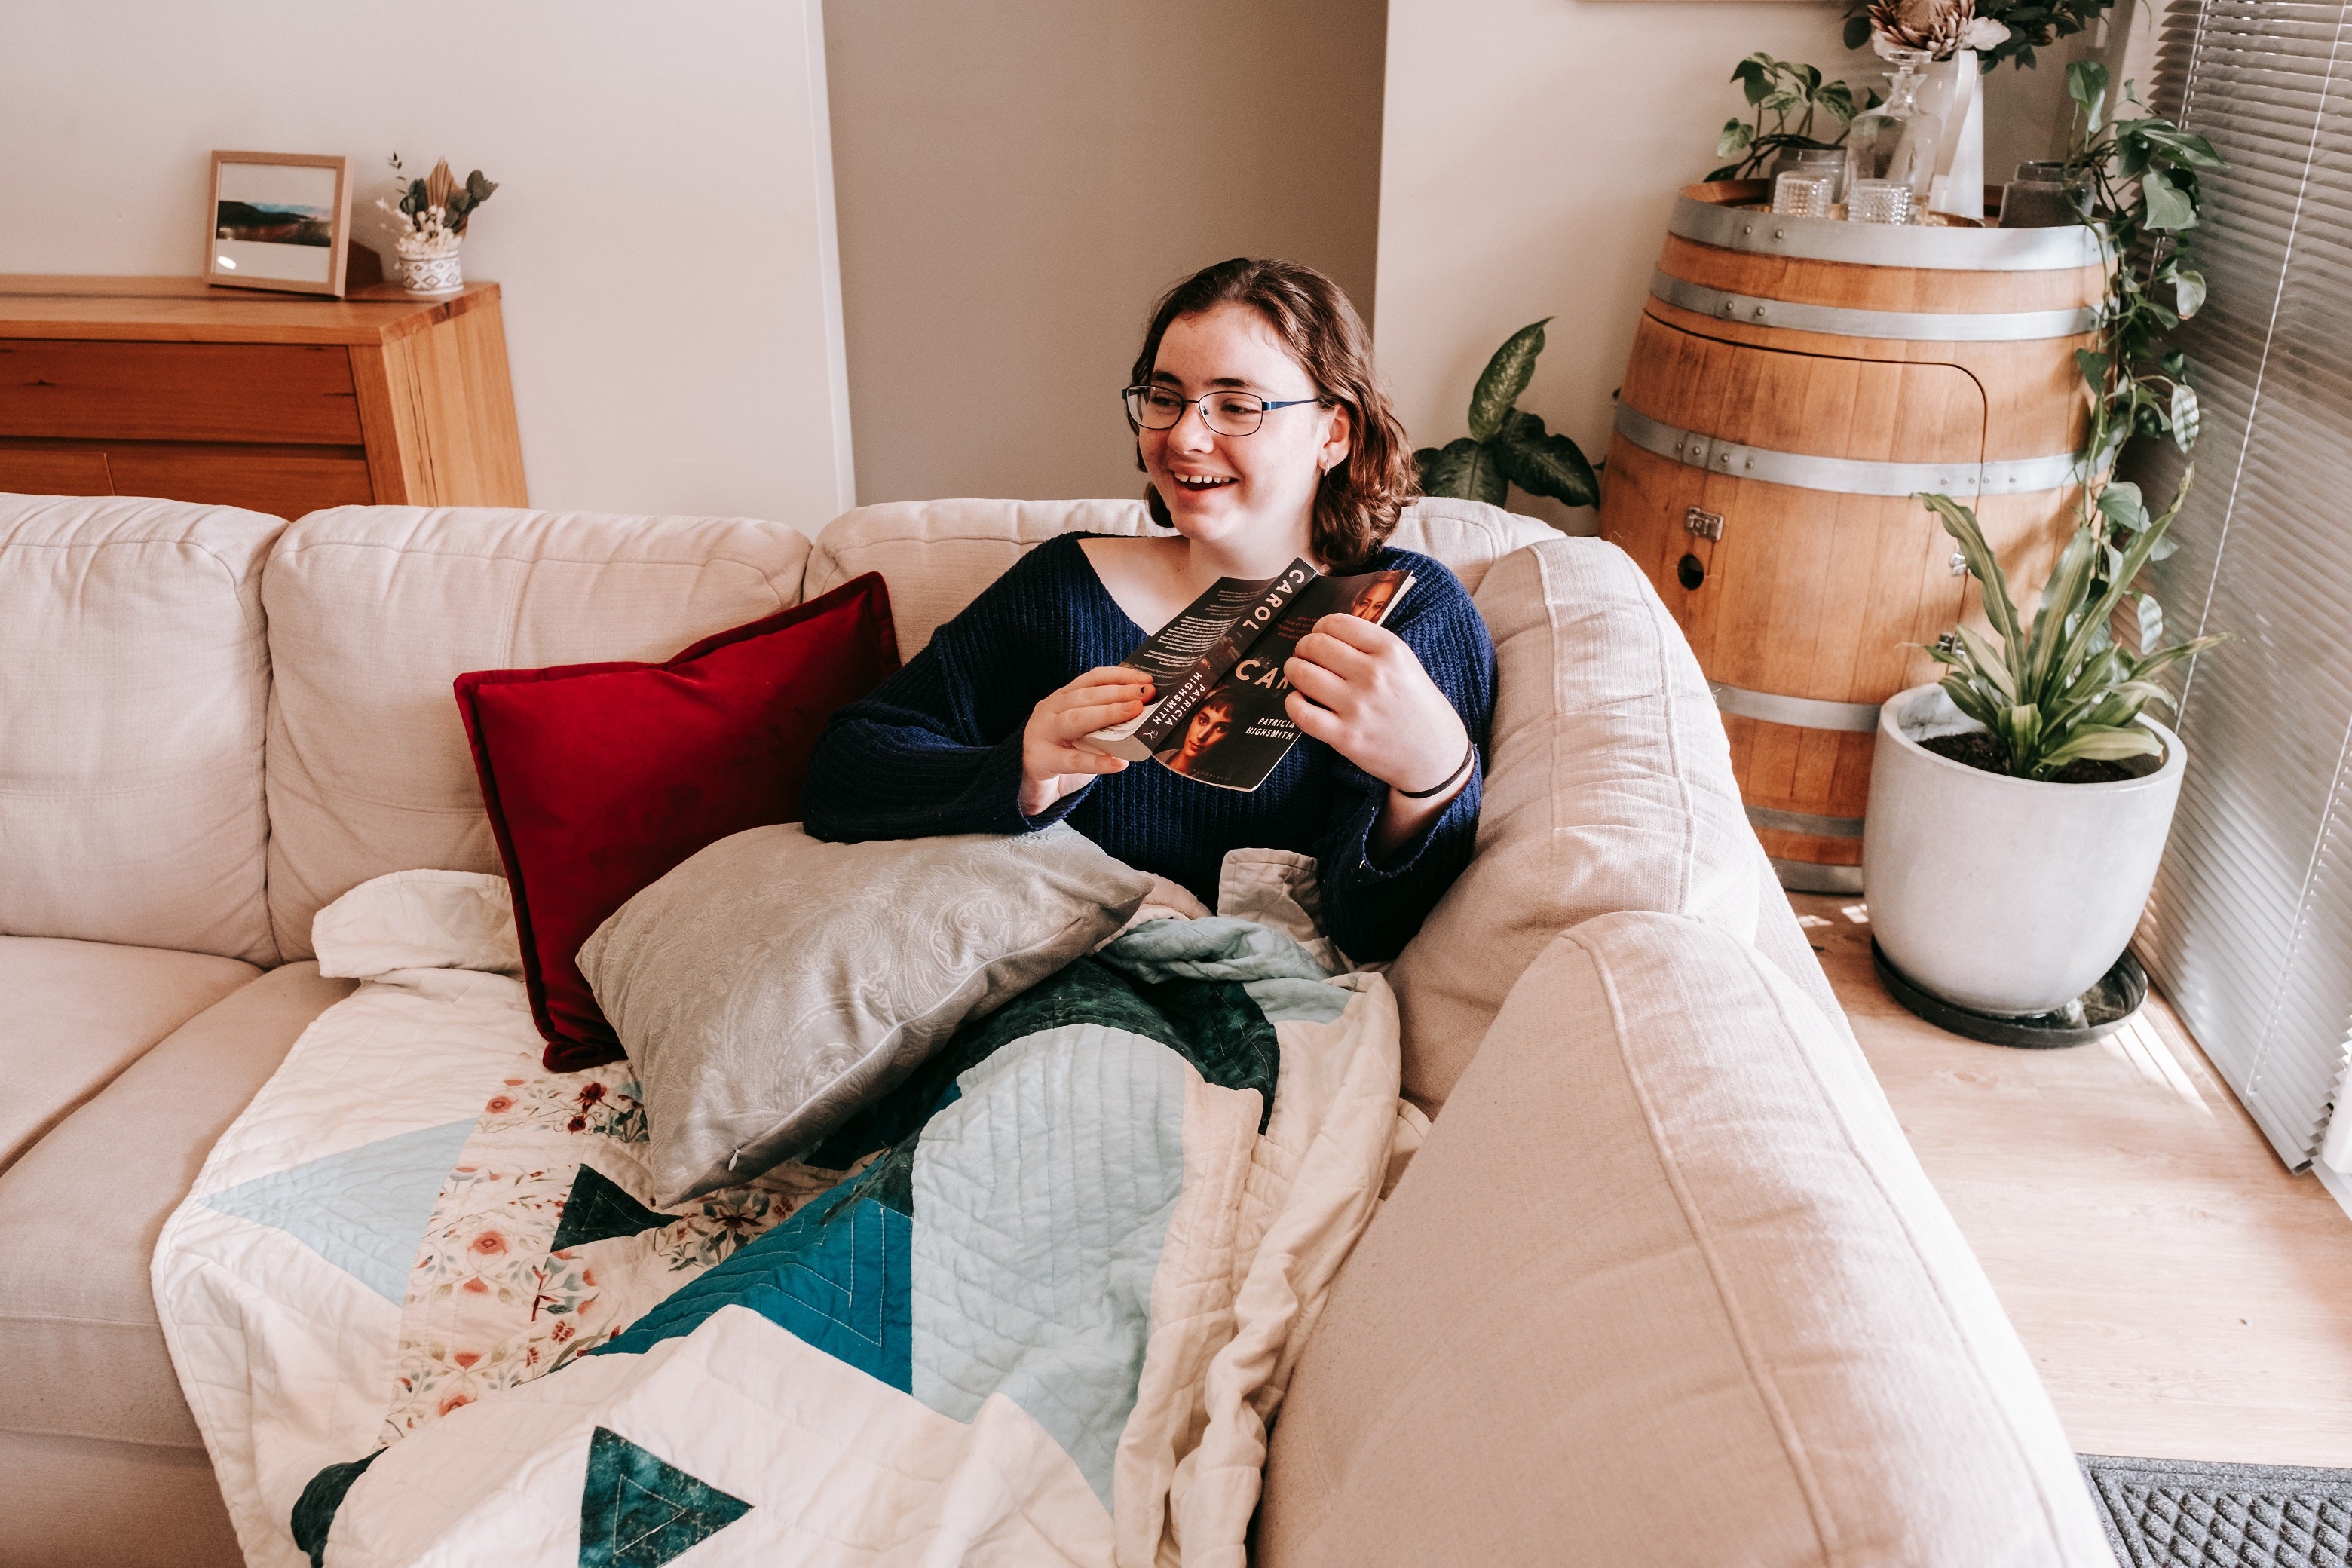 Lady sitting on the couch under a handmade quilt, holding a book and laughing 